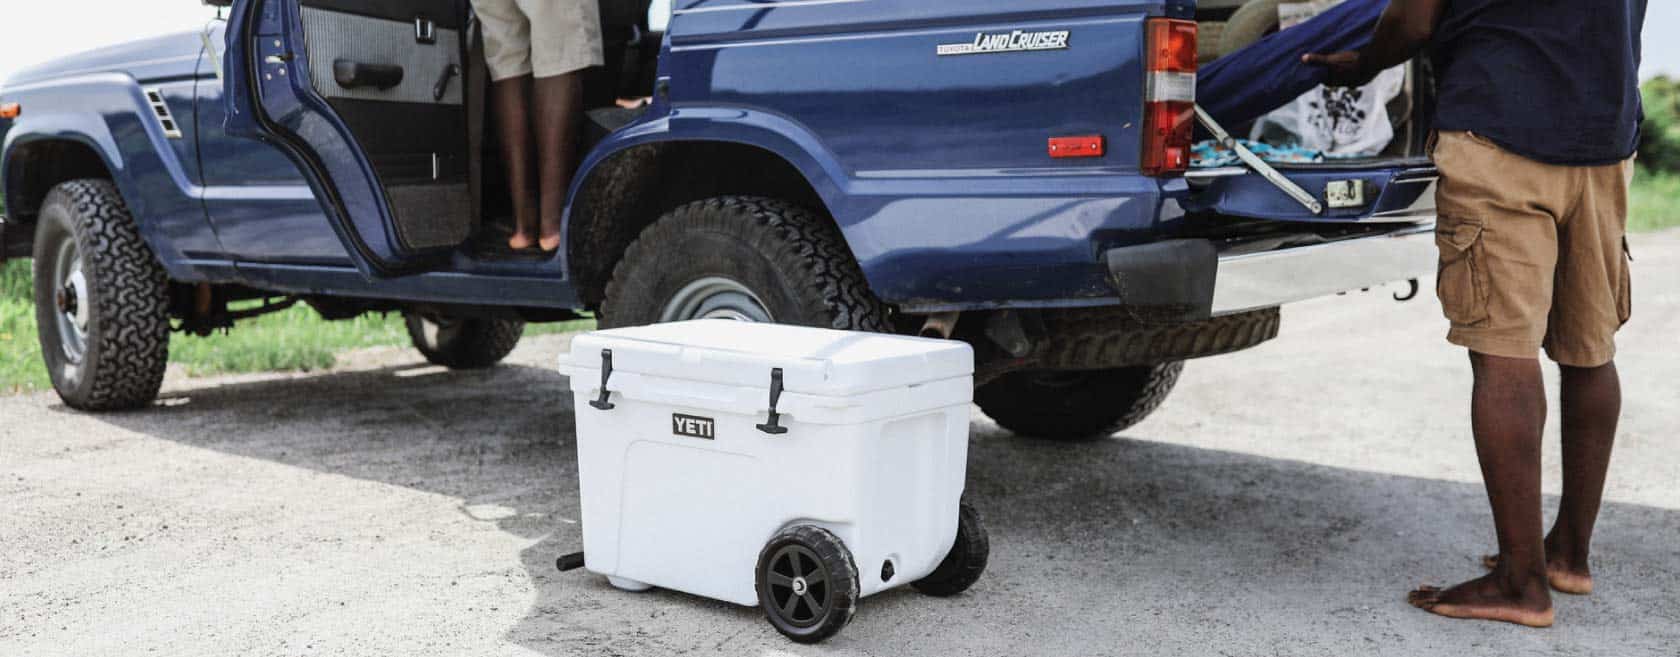 yeti cooler on the ground with a blue pick up truck